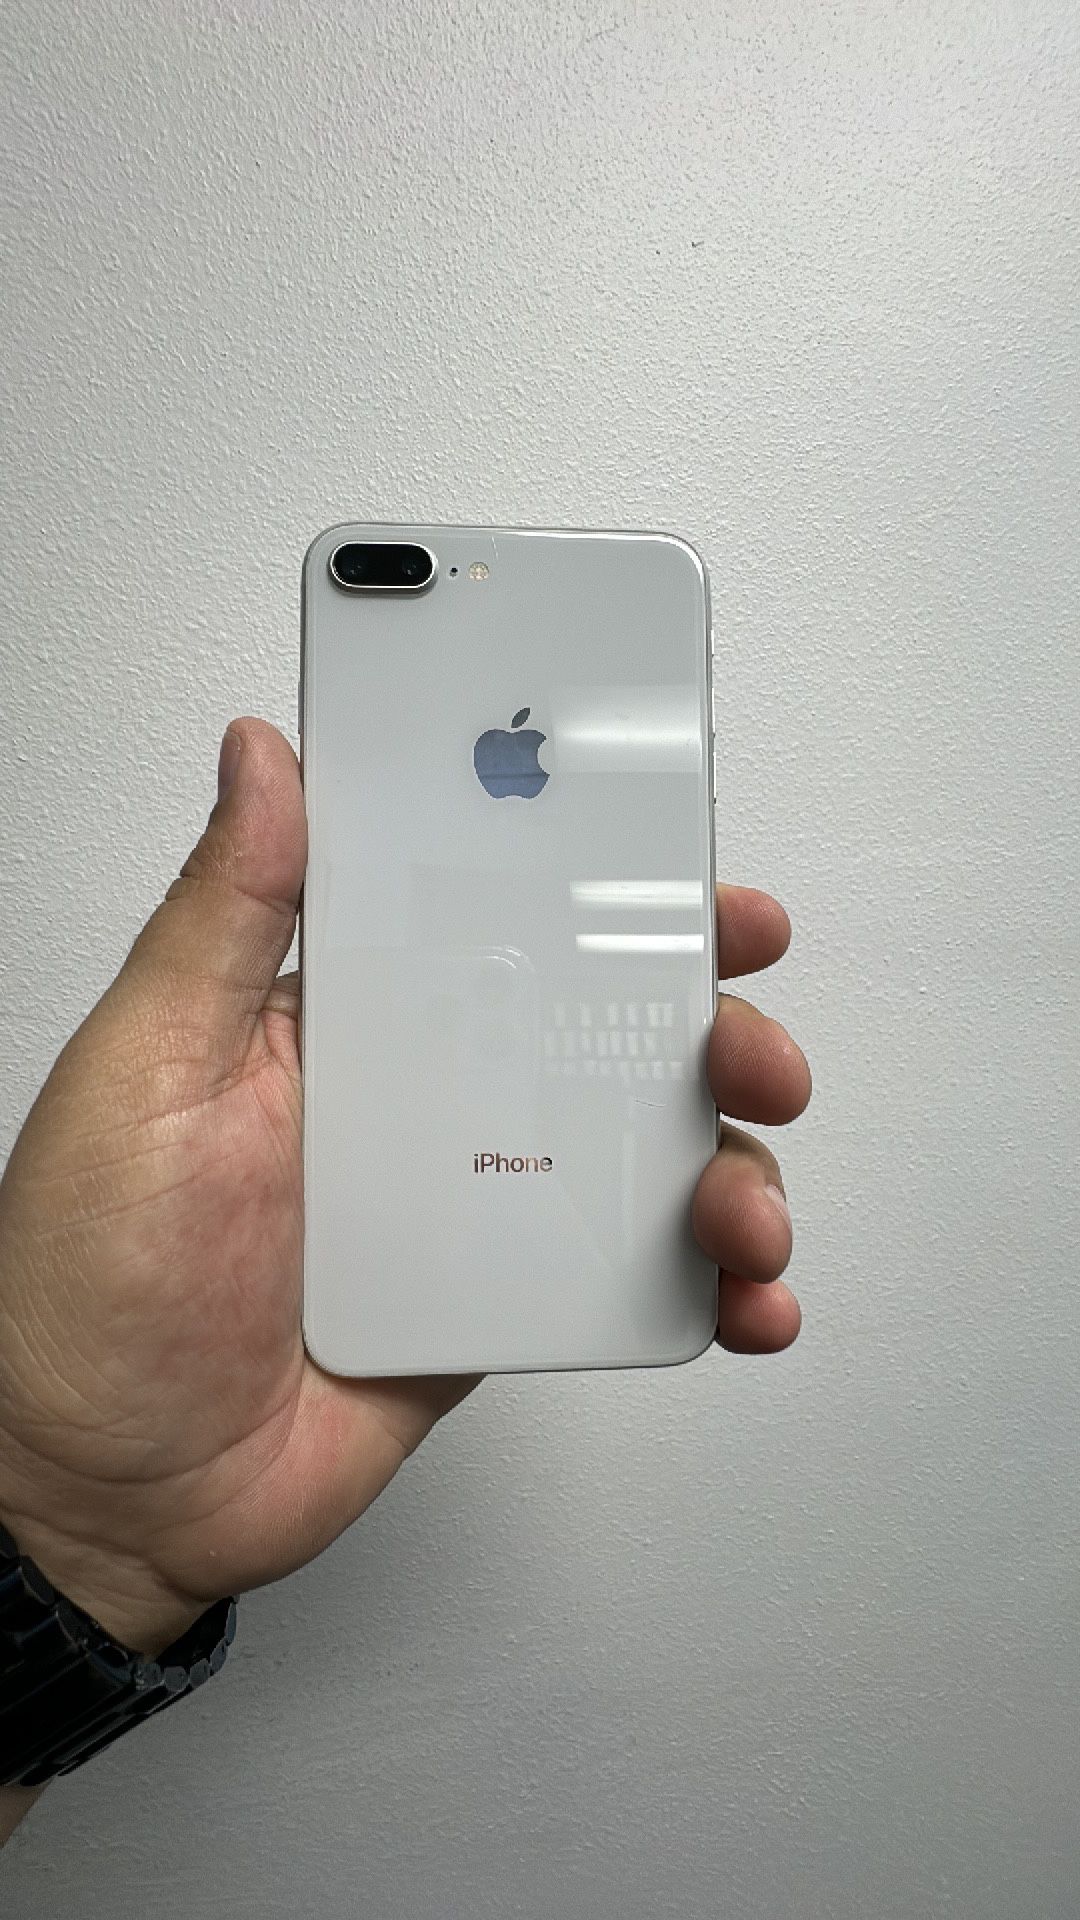 Apple iPhone 8 Plus 64 GB MetroPCS  Simple mobile  Ultra mobile  T-Mobile 15 days warranty on the device  Comes with a USB charger 